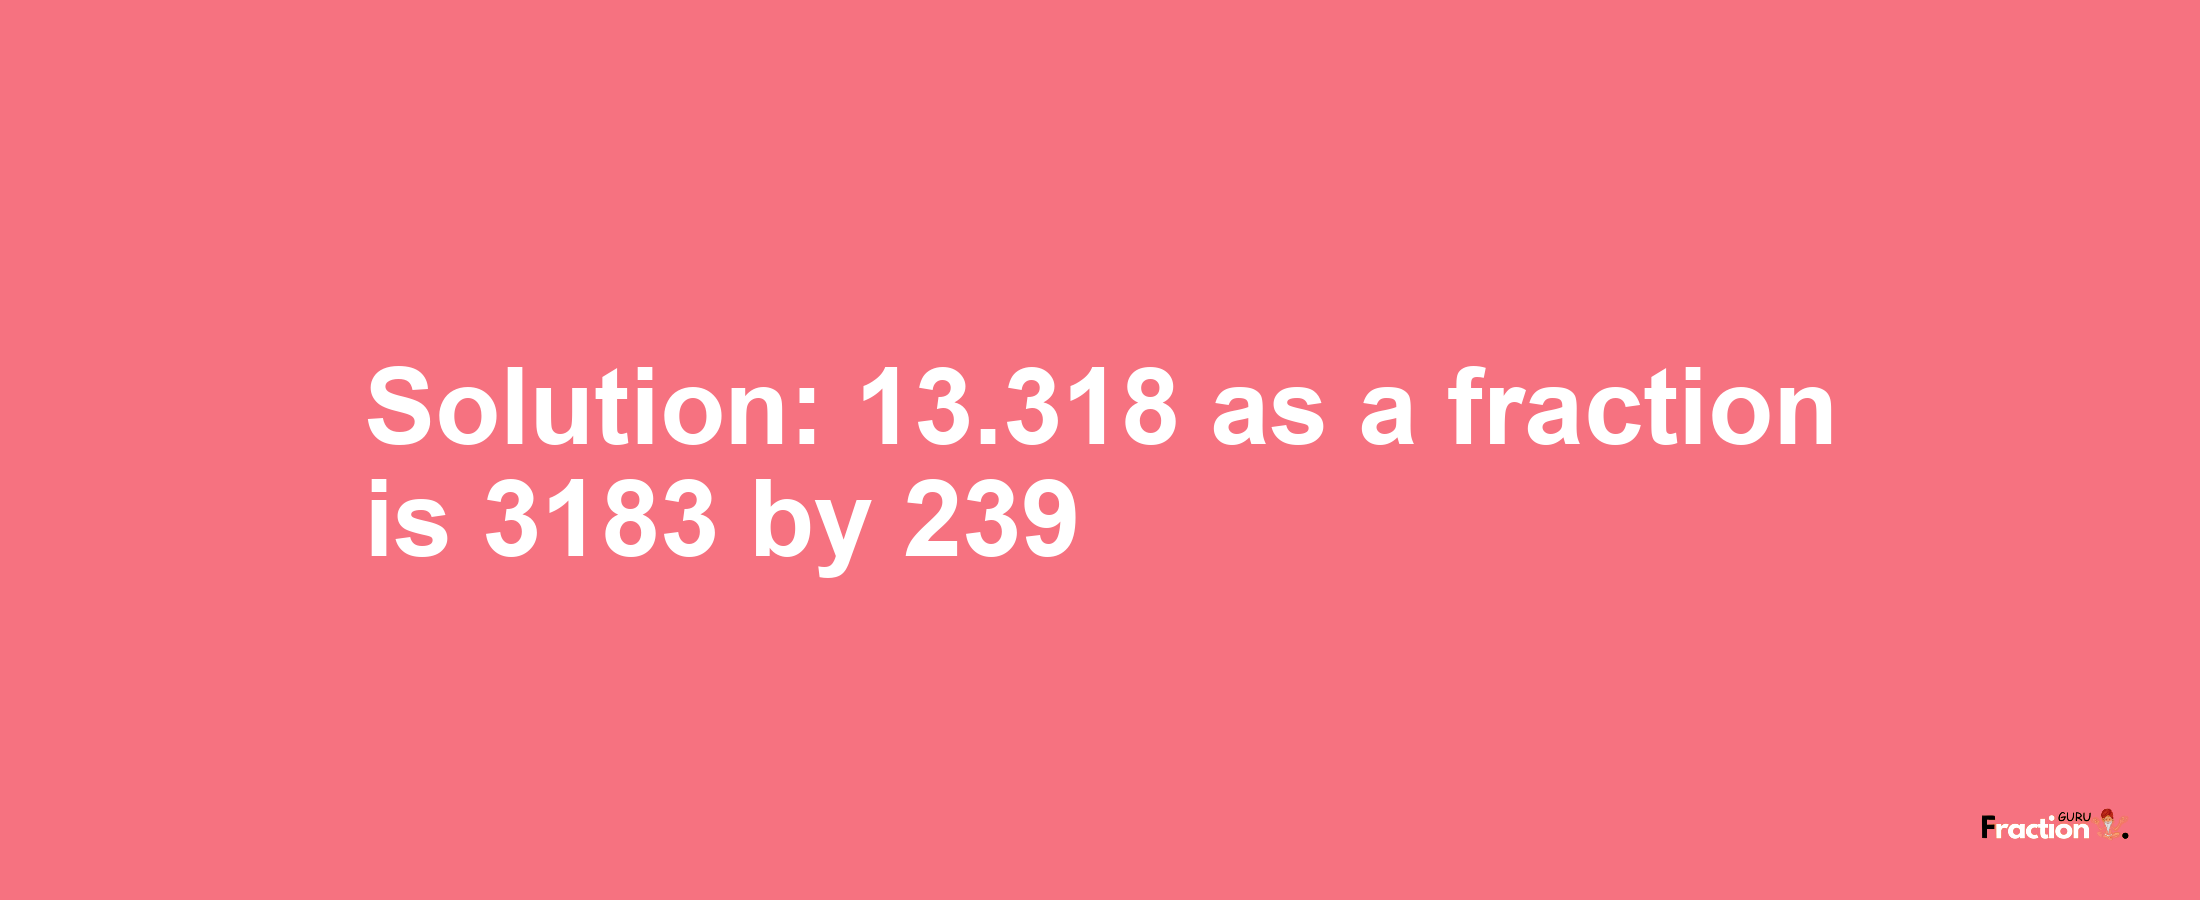 Solution:13.318 as a fraction is 3183/239